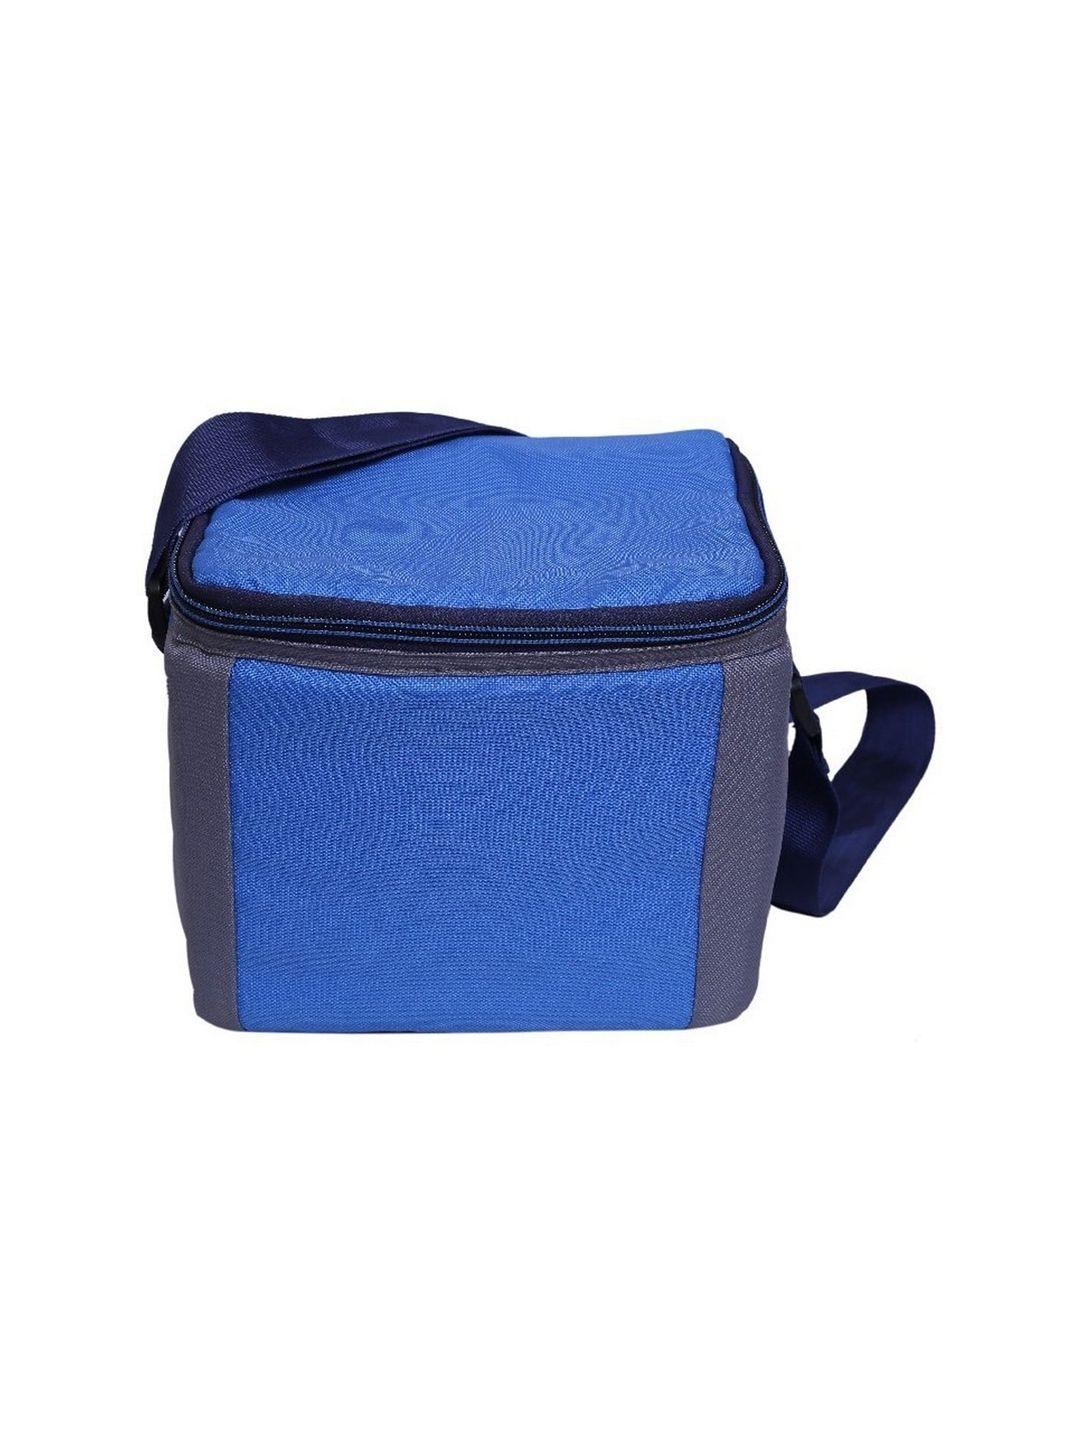 bags.r.us-royal-blue-insulated-polyester-chiller-lunch-bag-with-free-ice-pack